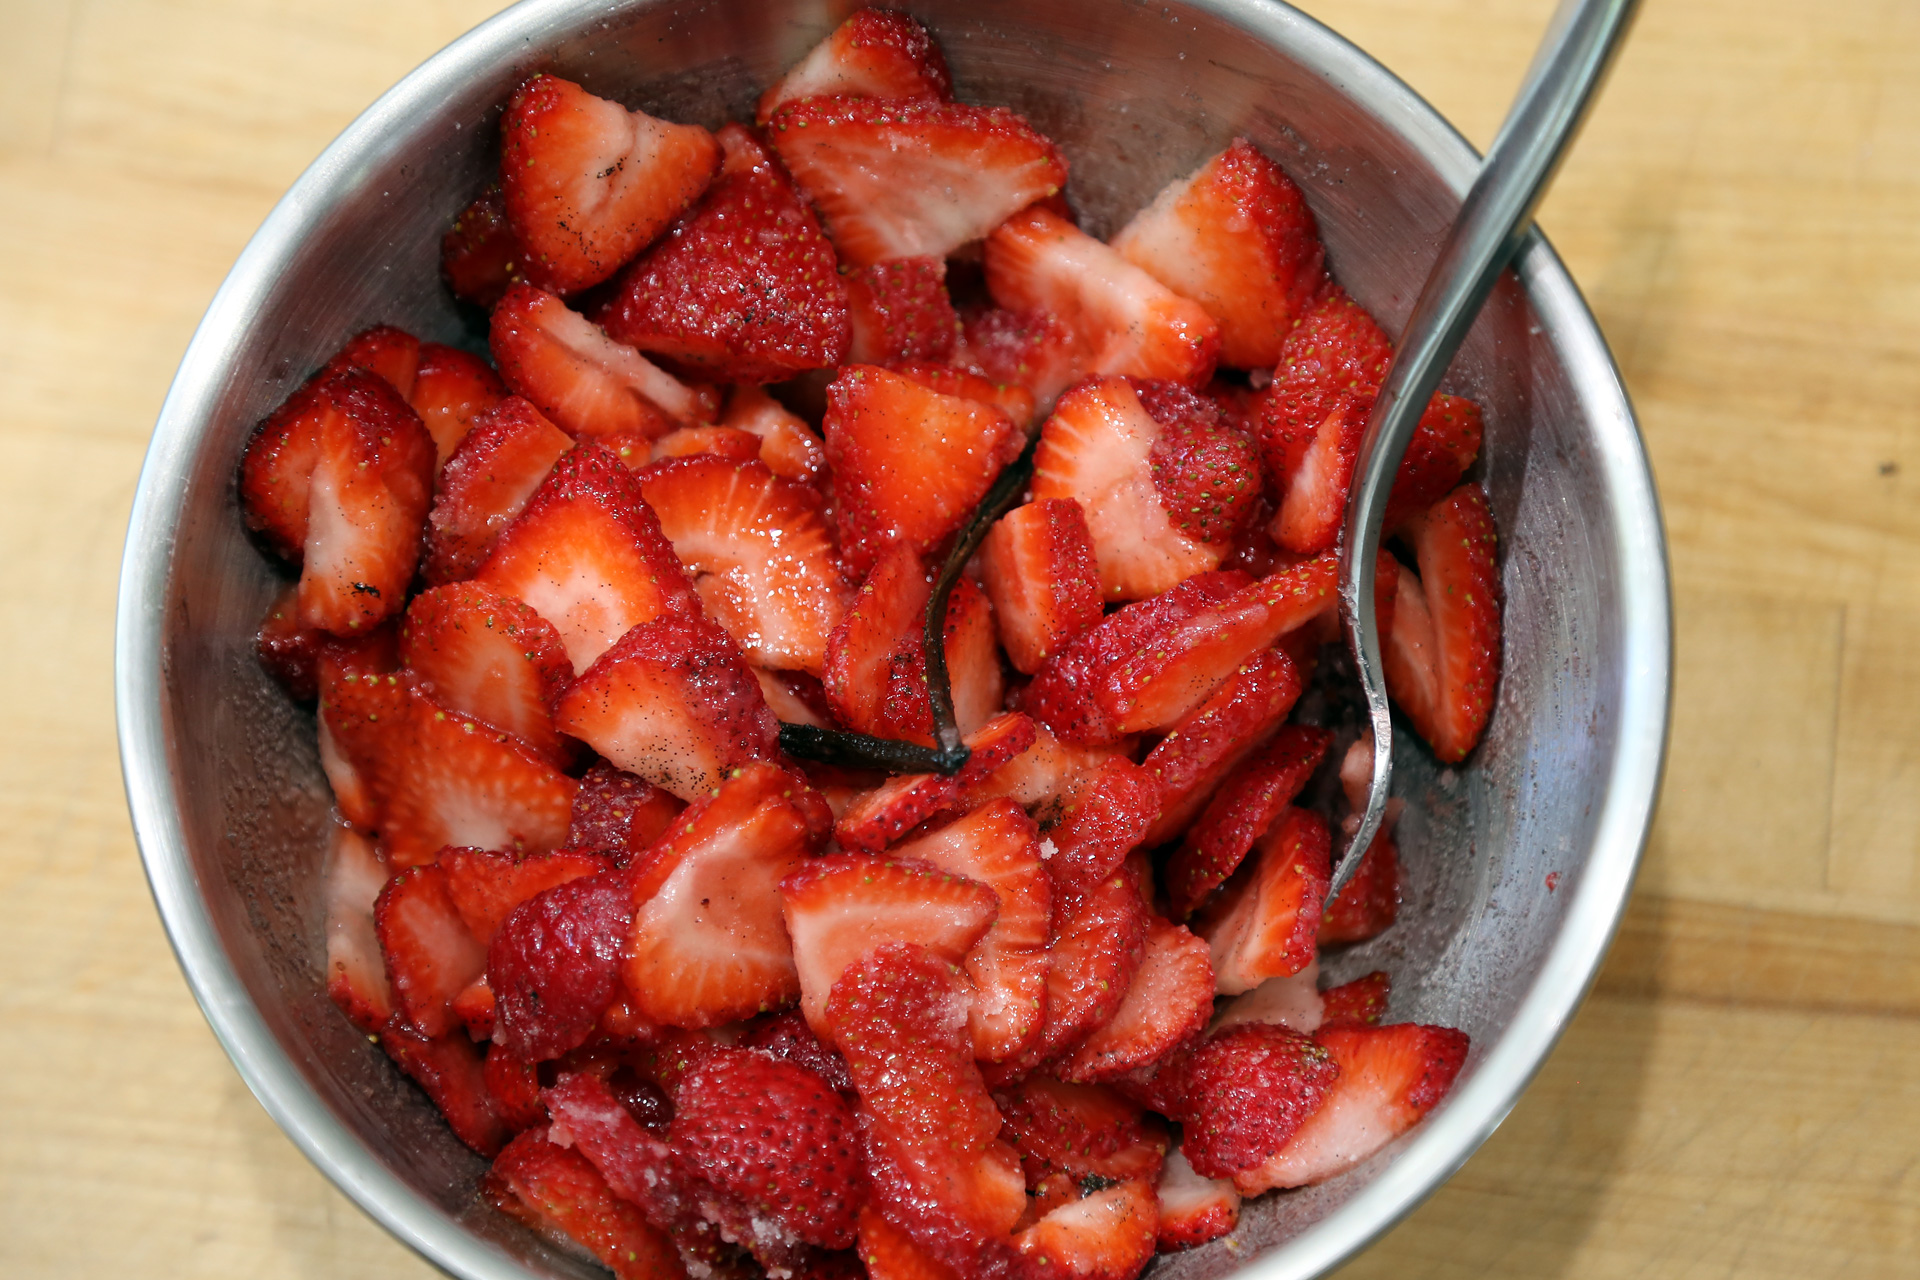 In a bowl, stir together the strawberries, 1/3 cup sugar, and vanilla bean seeds and pod.